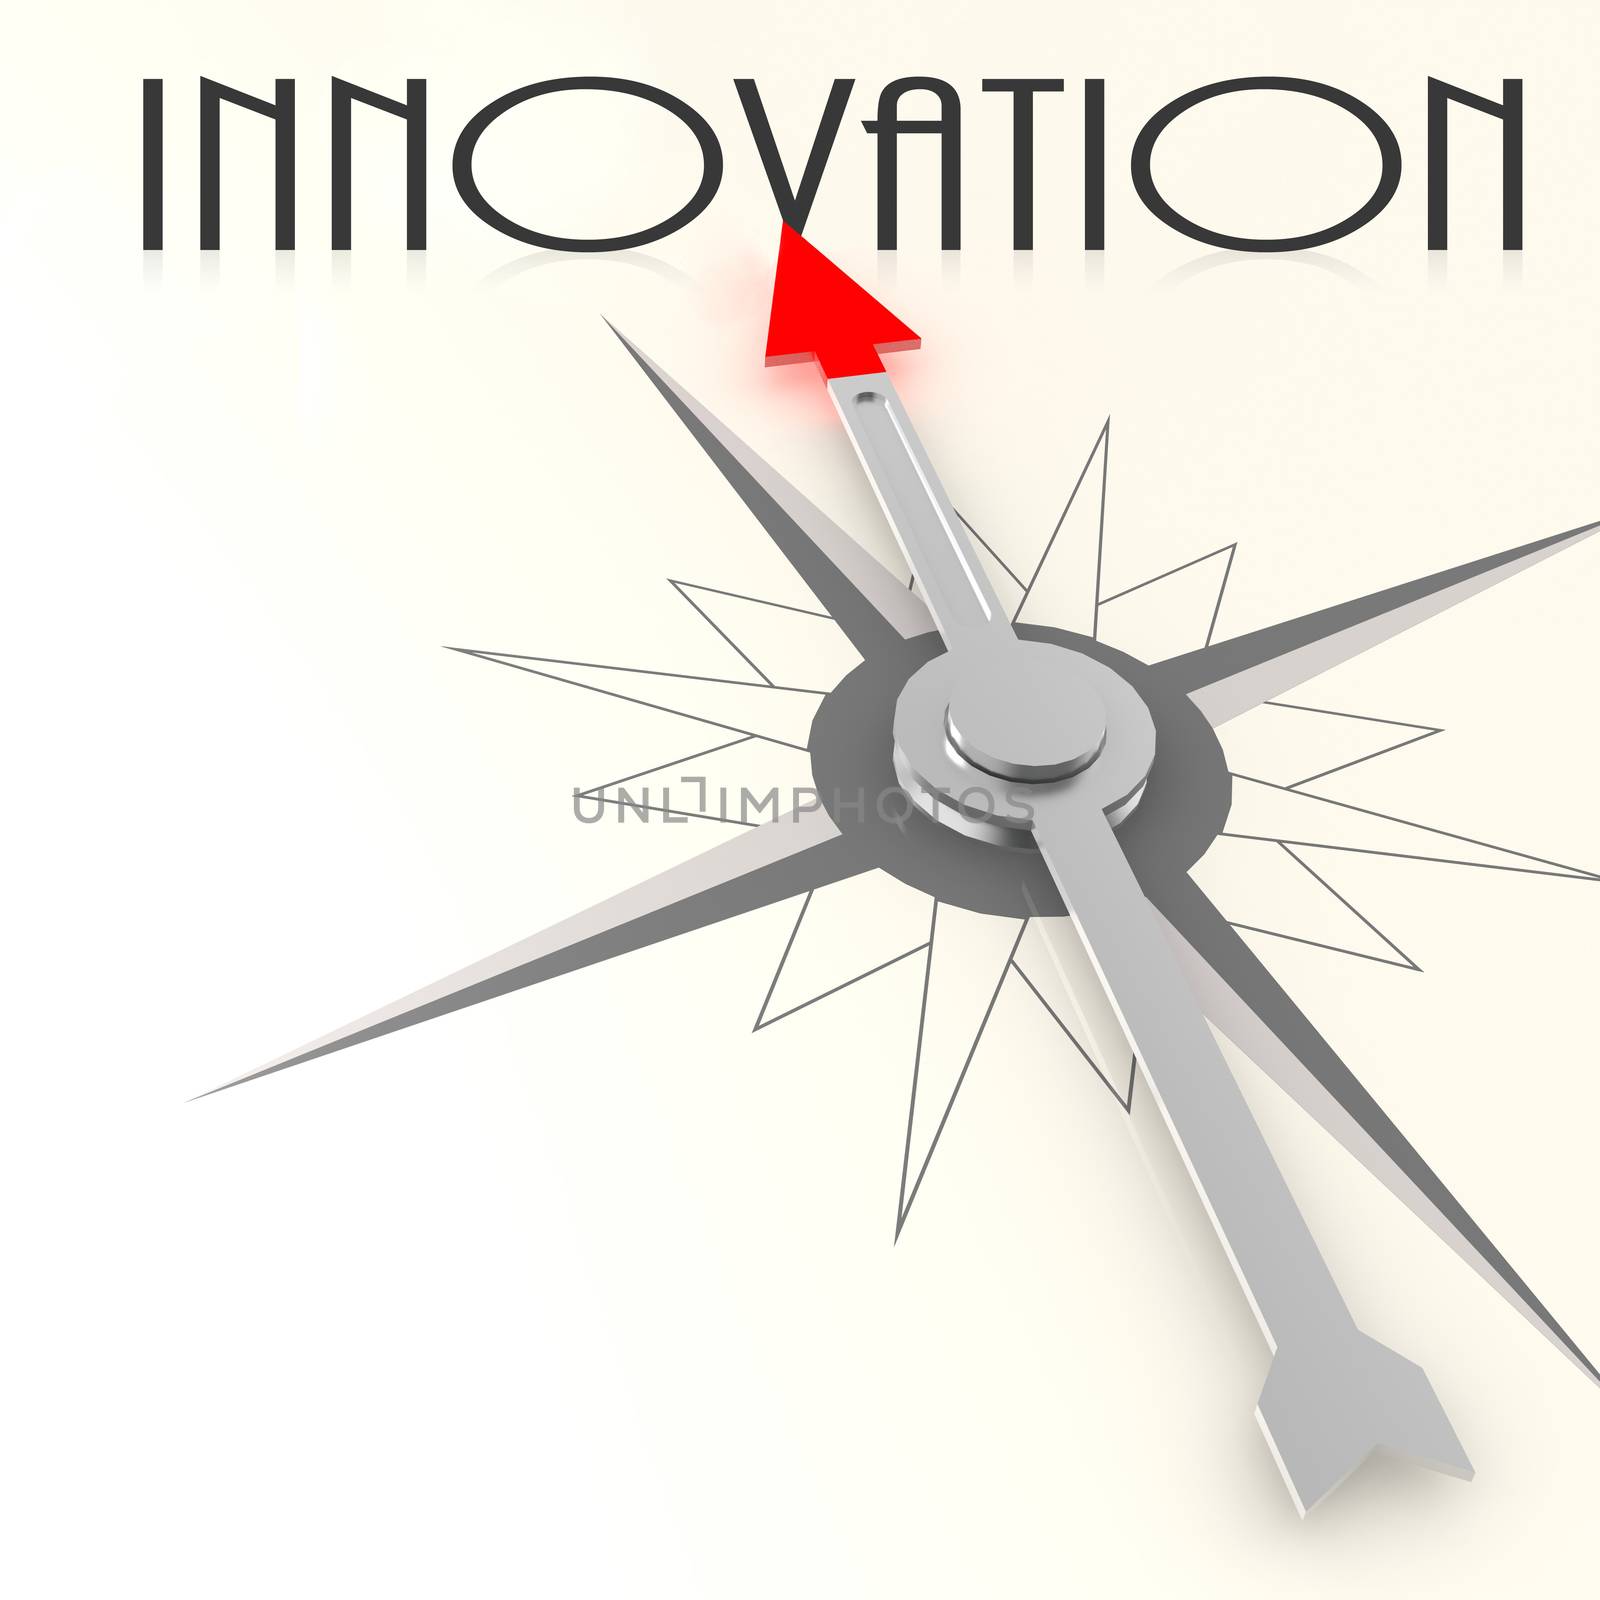 Compass with innovation word image with hi-res rendered artwork that could be used for any graphic design.